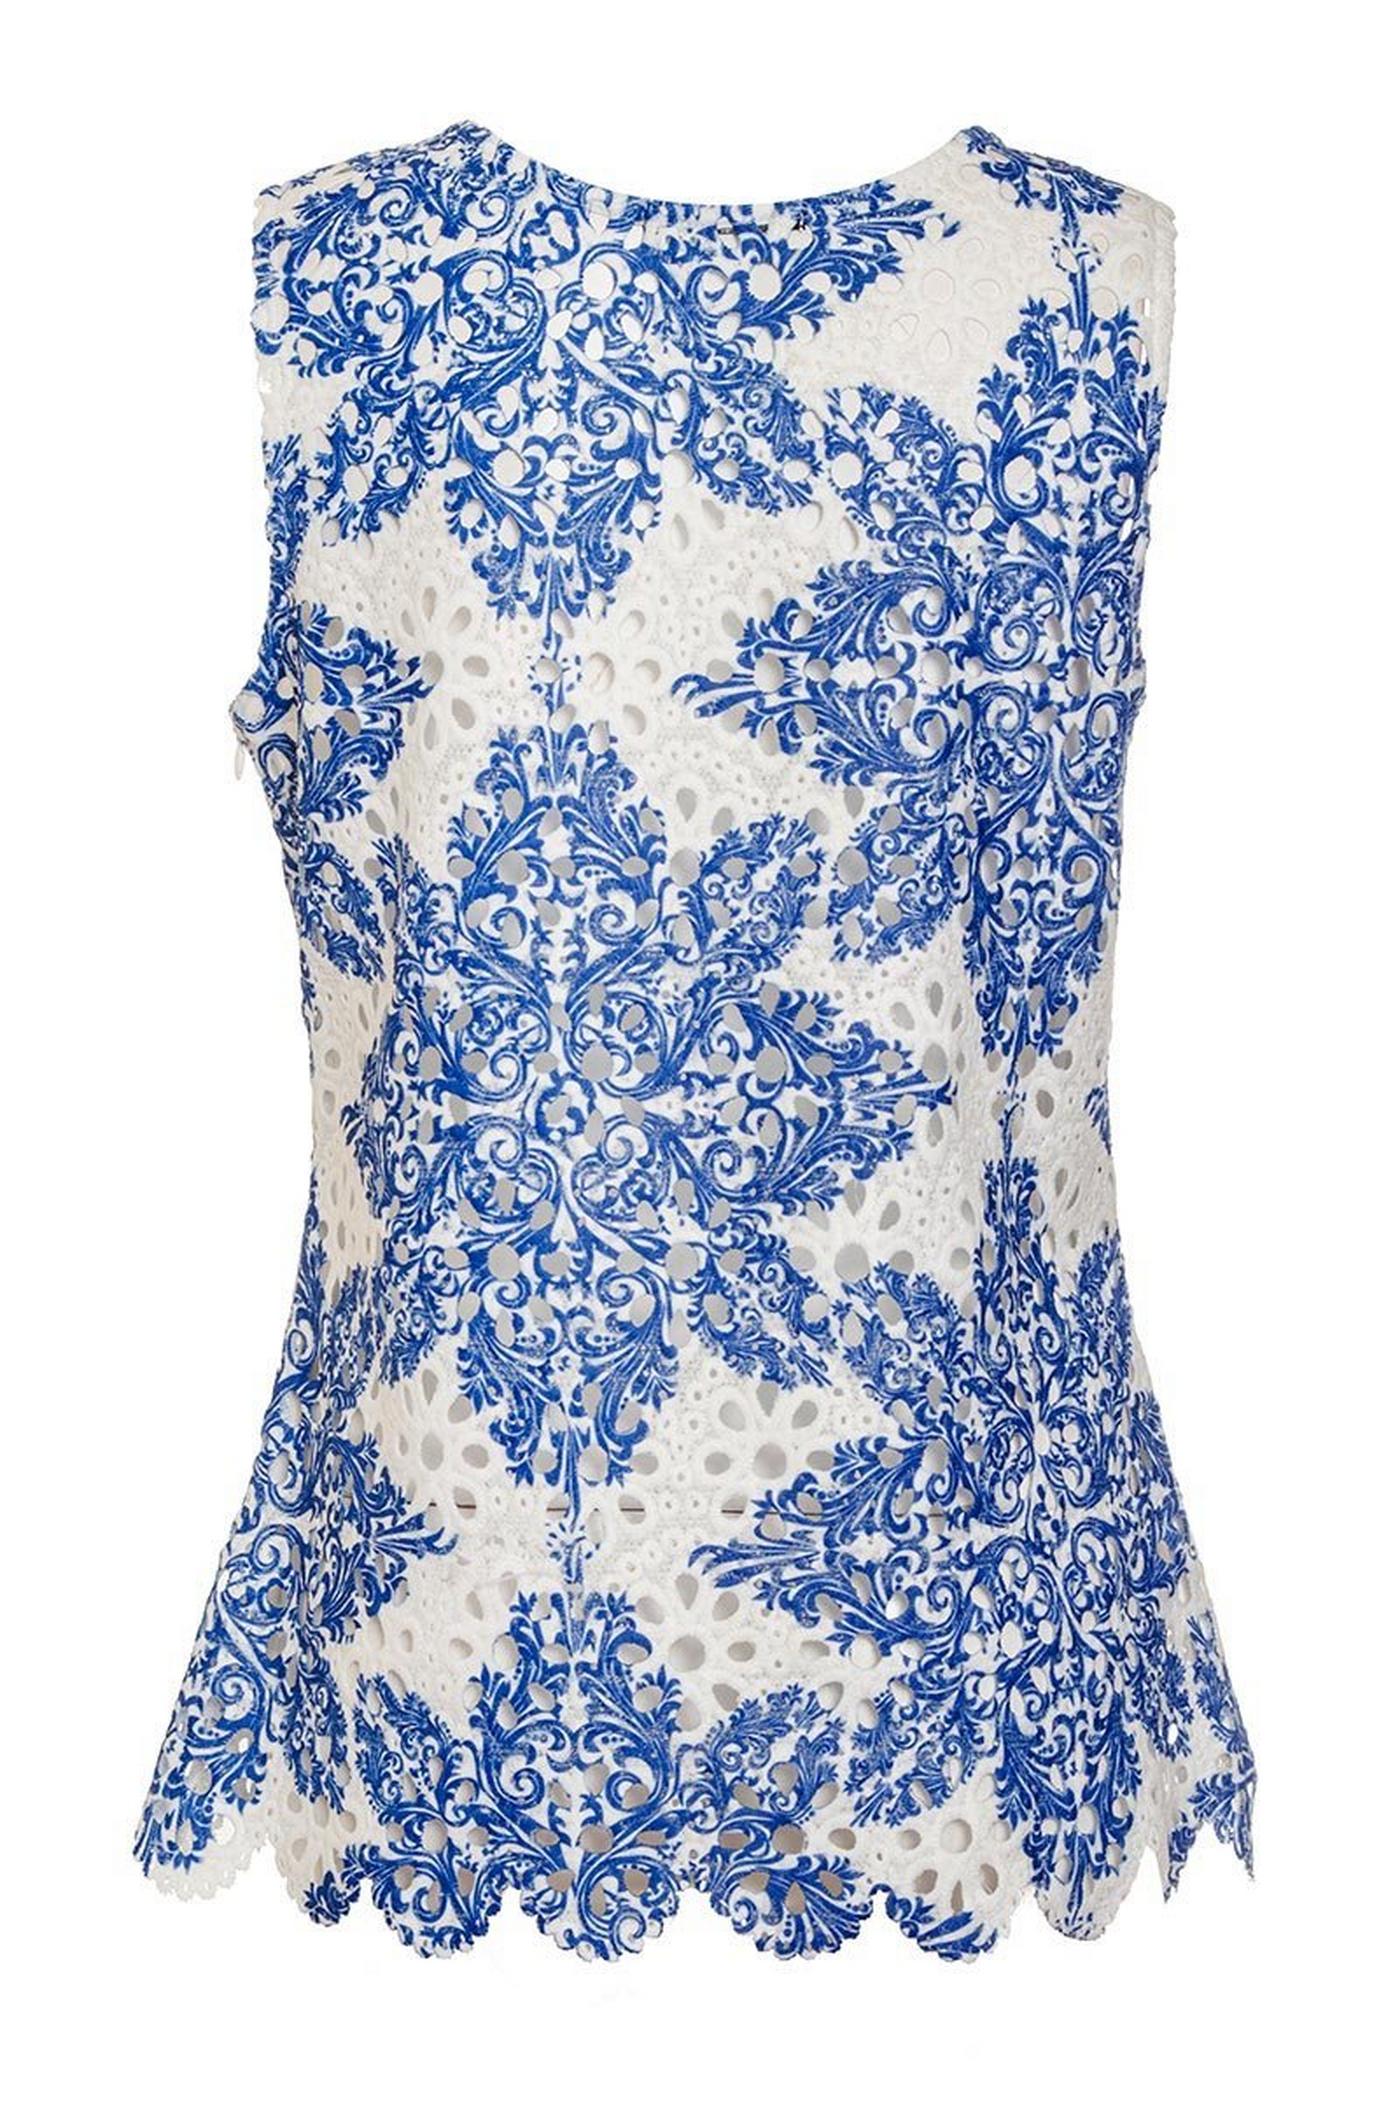 White And Blue Crochet Paisley Print Top